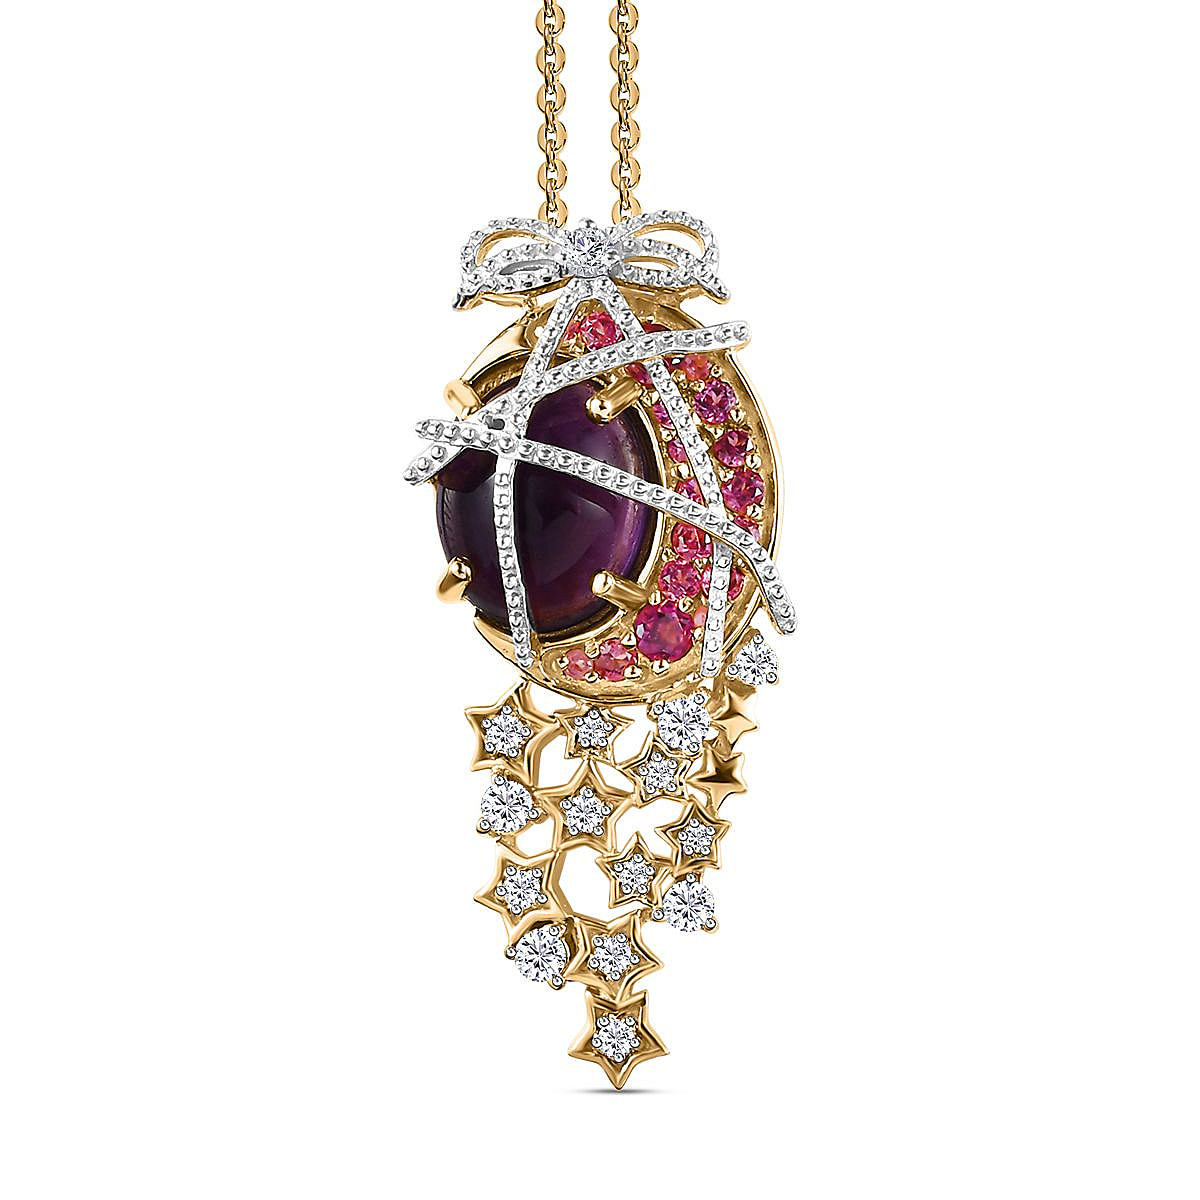 GP Celestial Dream Collection - Amethyst, Garnet & Zircon Pendant with Chain (Size 20) in 18K Gold Vermeil Plated Sterling Silver 5.04 Ct, Silver Wt. 6.80 Gms